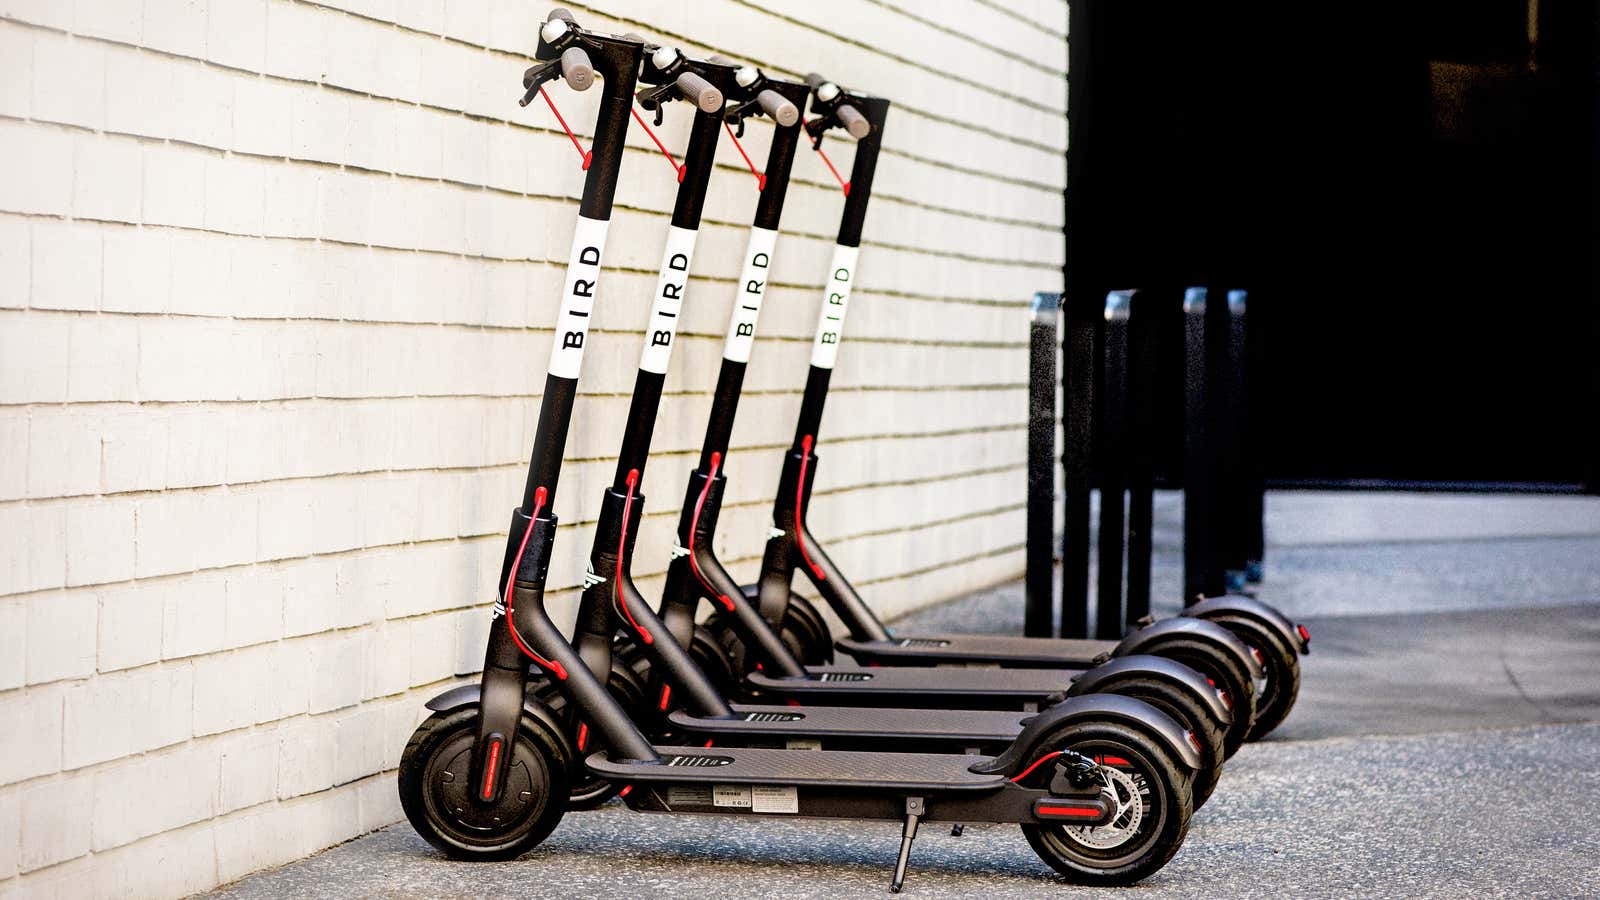 A flock of Bird scooters.